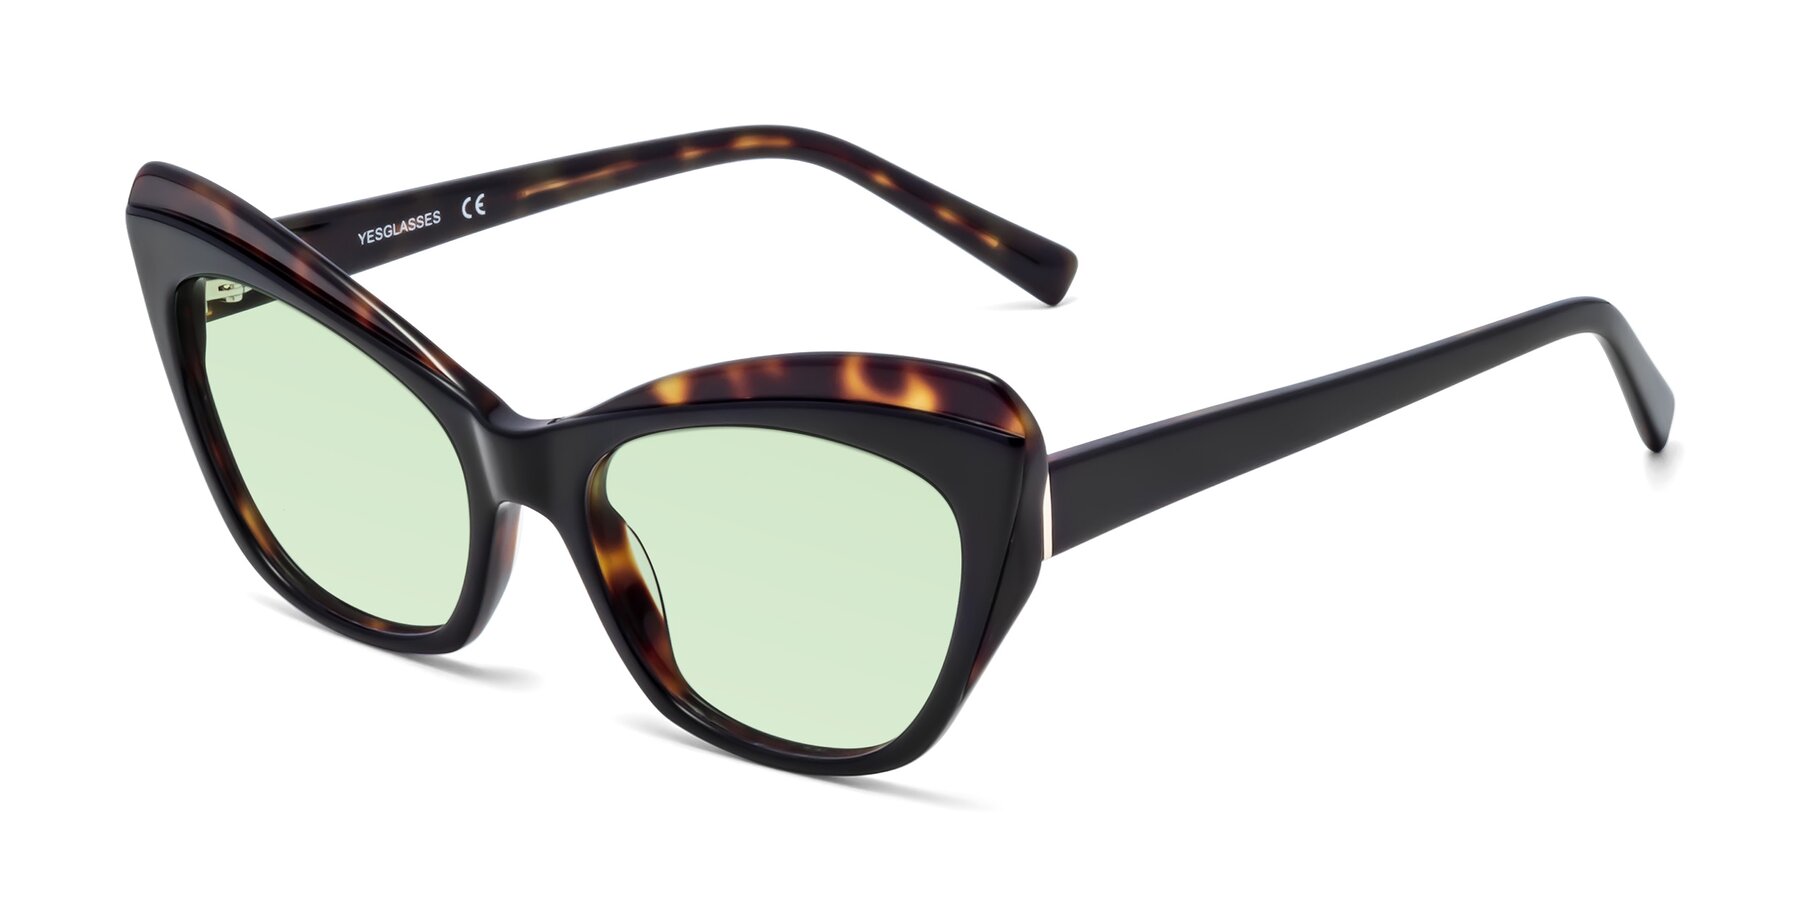 Angle of 1469 in Black-Tortoise with Light Green Tinted Lenses